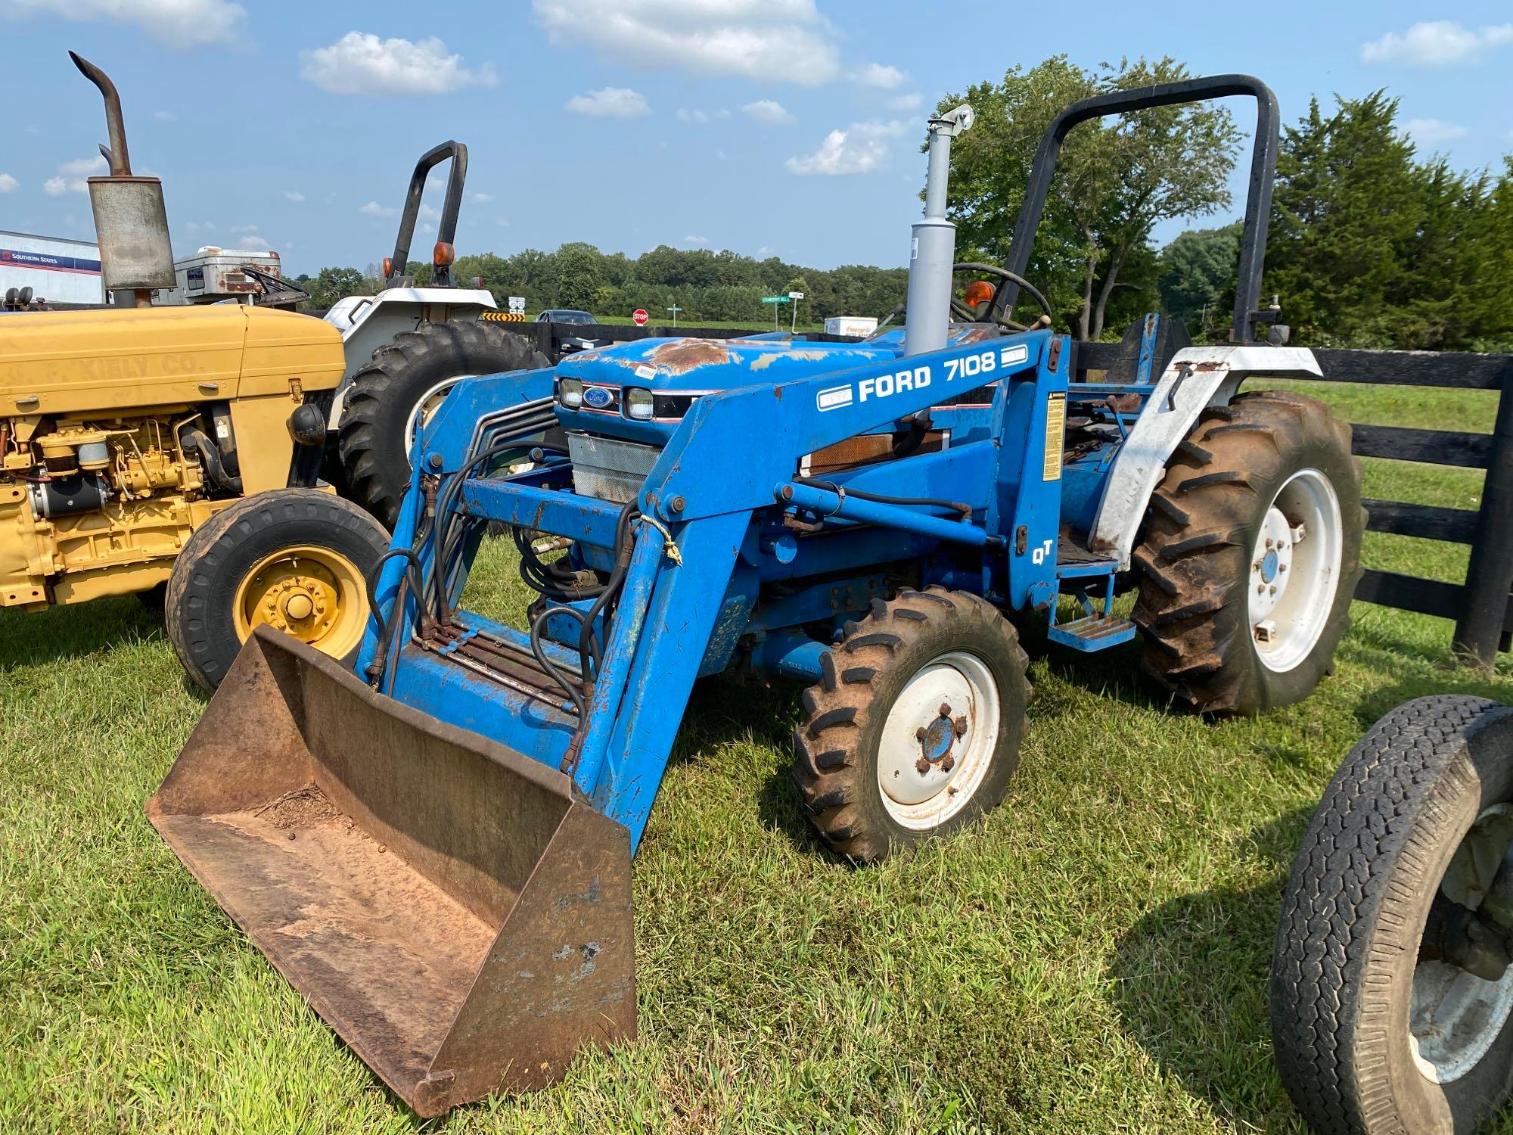 Image for Ford 1720 Tractor w/ Loader, 1513.2 Hours, Per seller- runs and operates as it should, few small